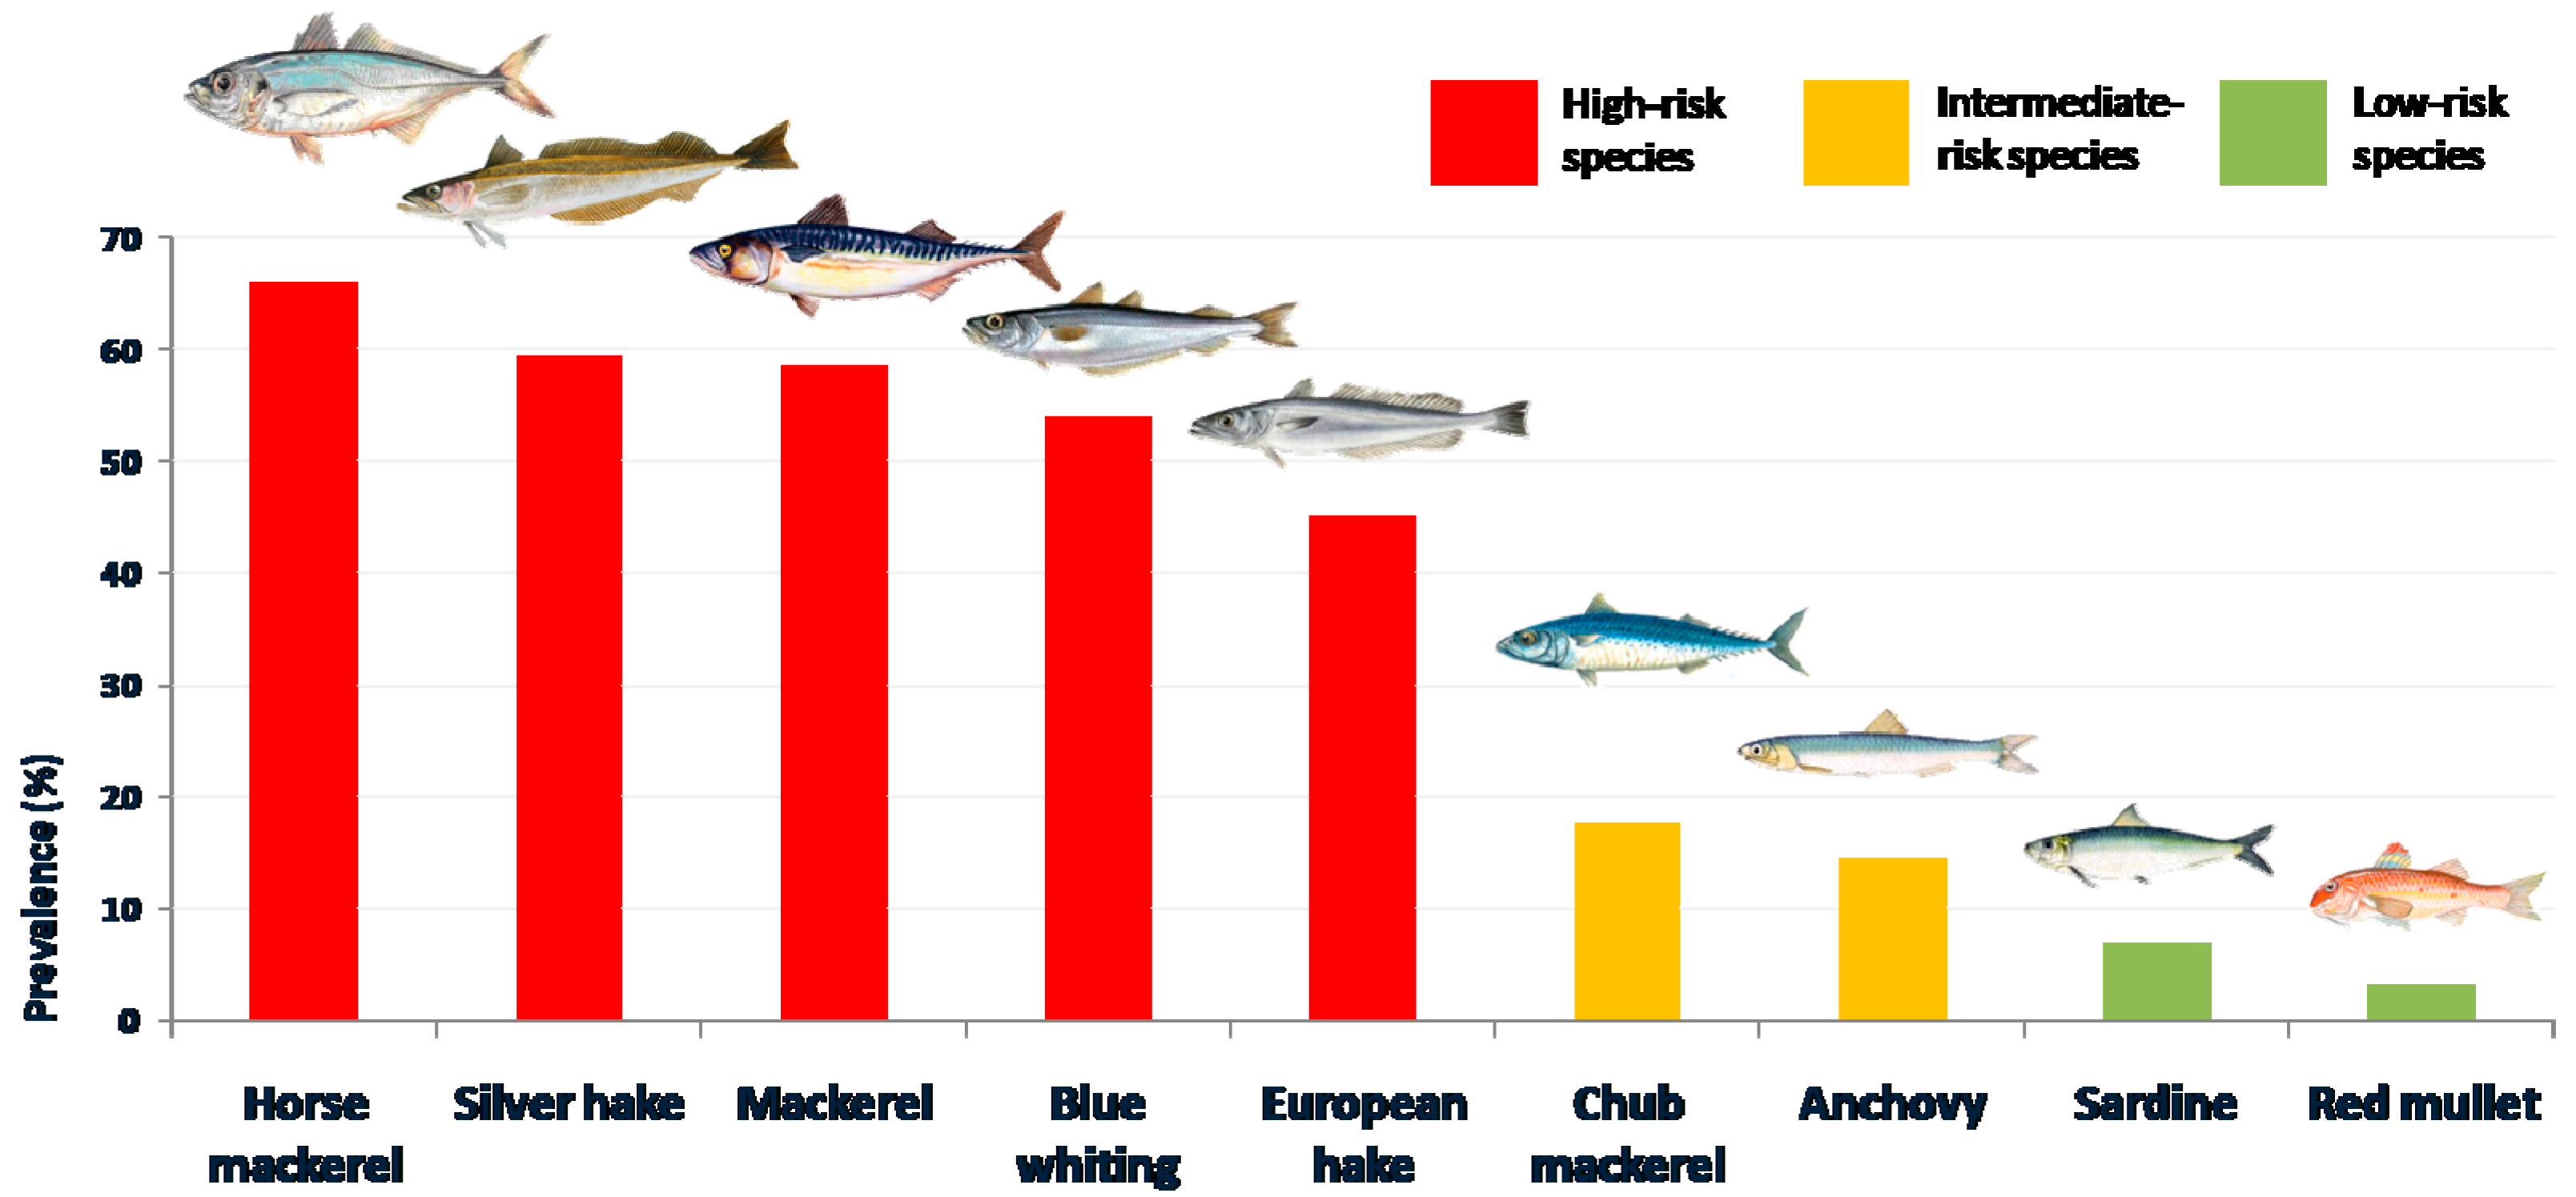 Fishes | Free Full-Text | Prevalence and Risk of Anisakid Larvae in ...